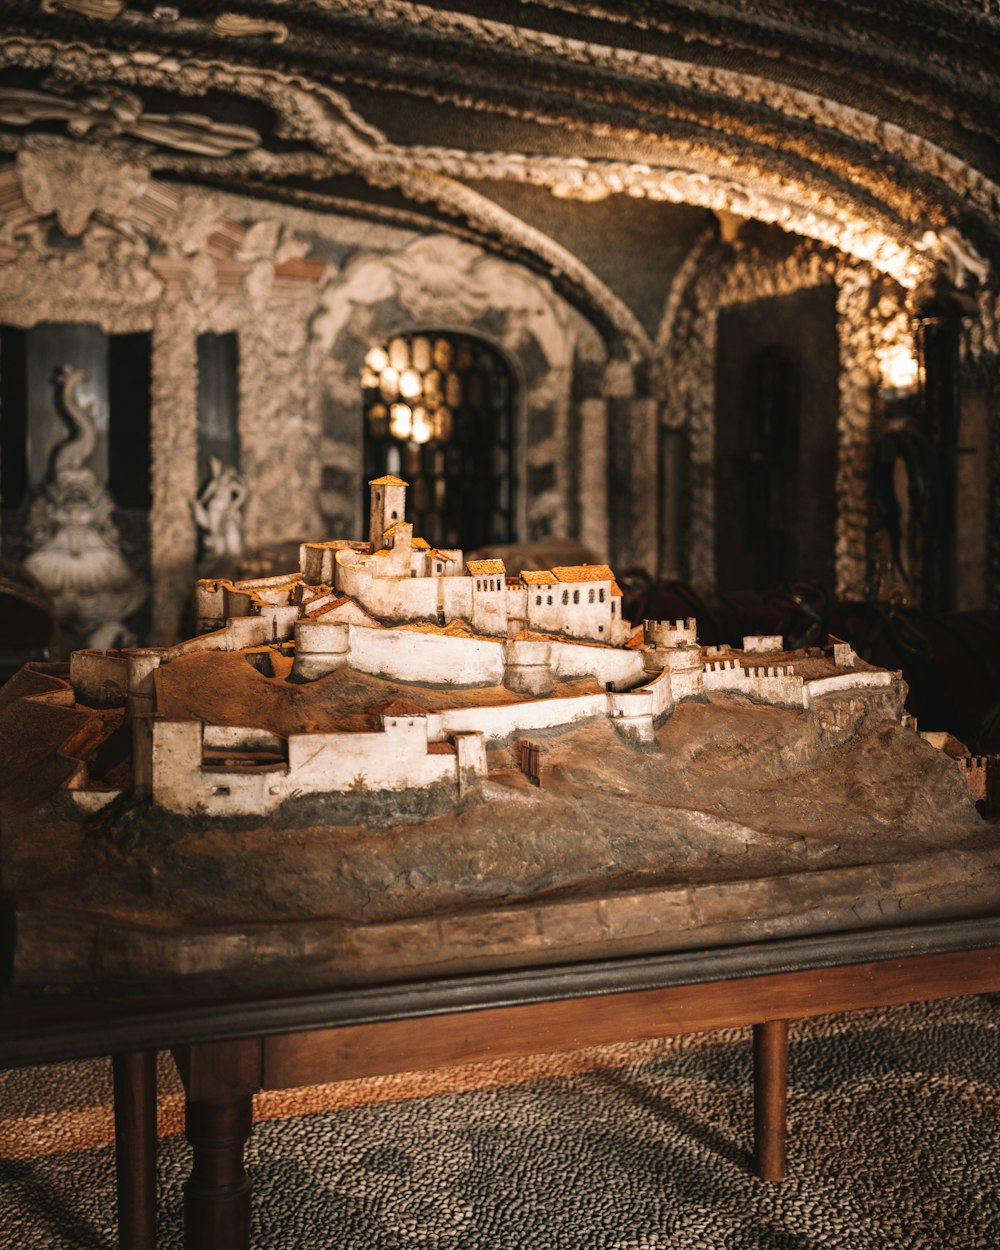 a model of a castle on display in a museum